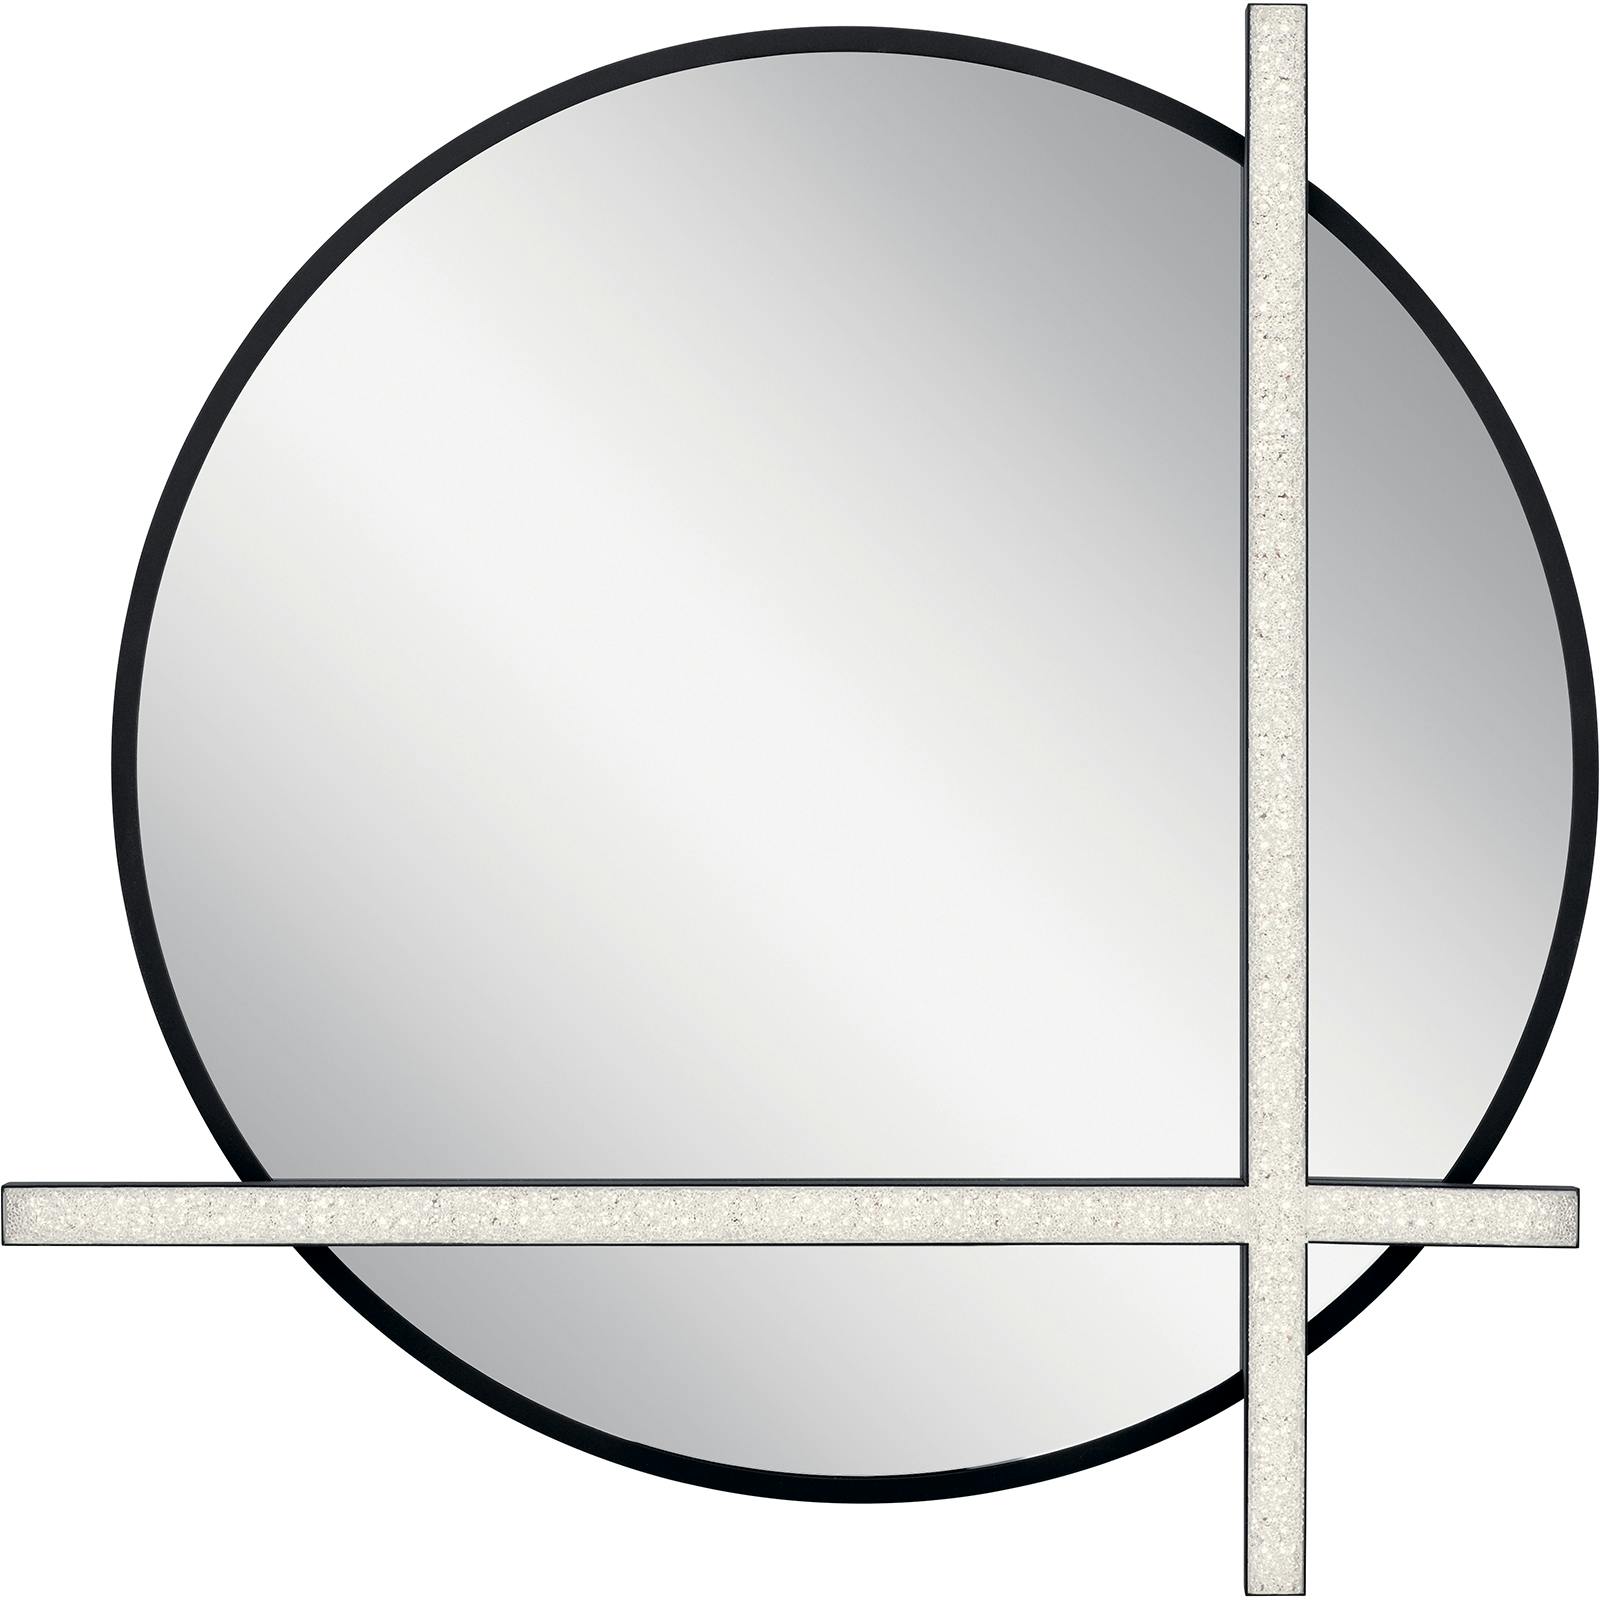 Front view of the Kemena™ LED Lighted Mirror Matte Black on a white background